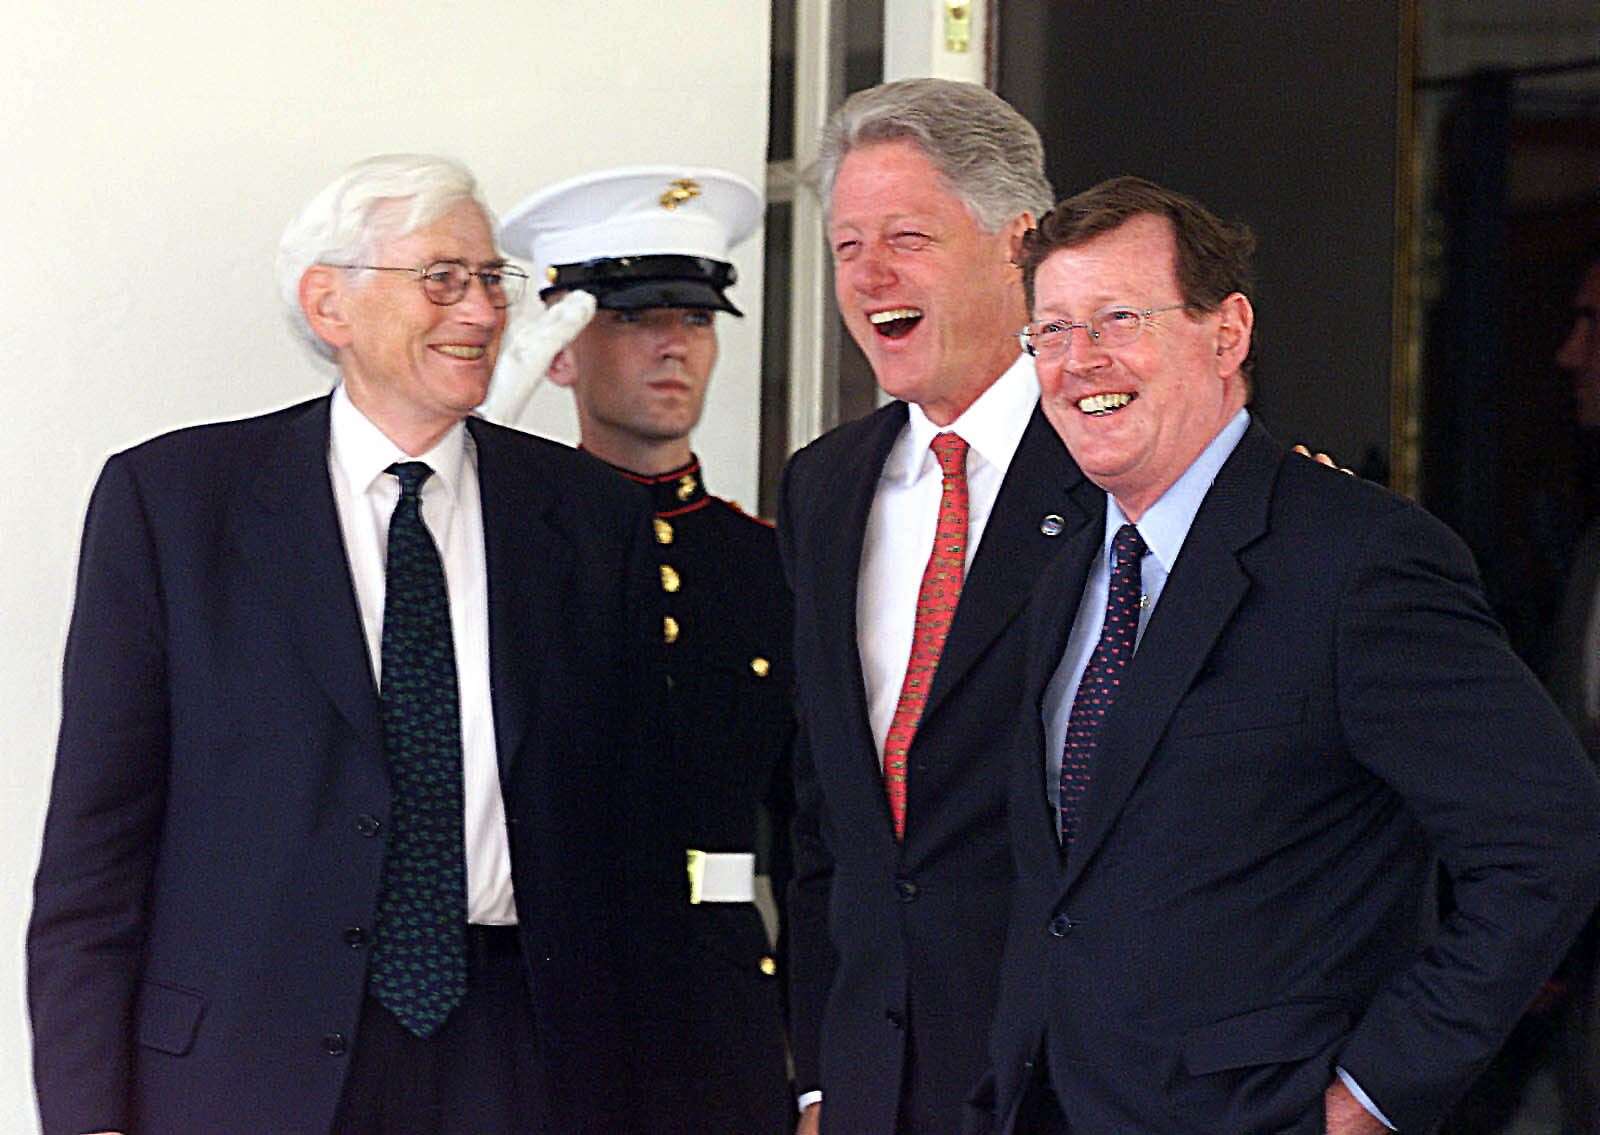 Former US president Bill Clinton jokes with Seamus Mallon and David Trimble when they visited the White House (Paul Faith/PA)